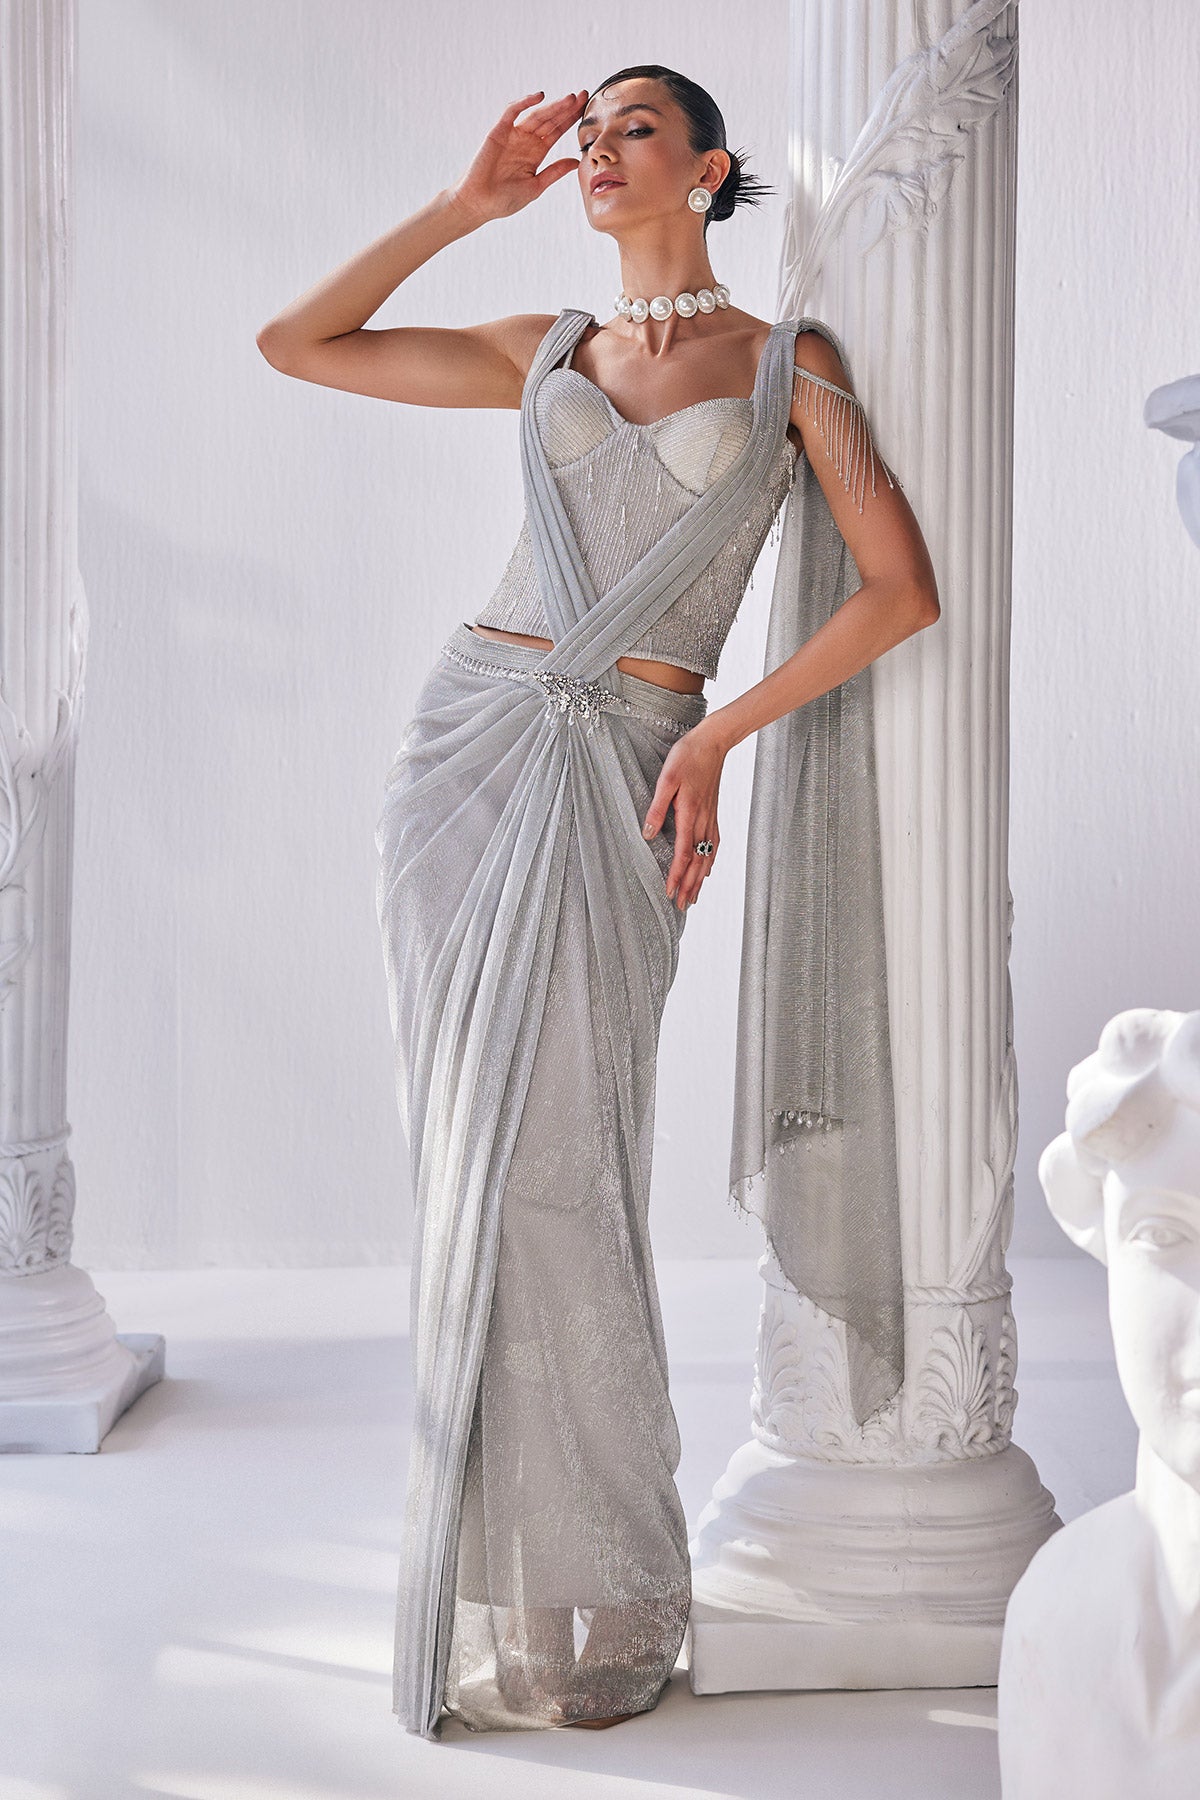 Silver Draped Saree Made With Crinkle Fabric Featuring A Corset Along With A Detailed Belt.